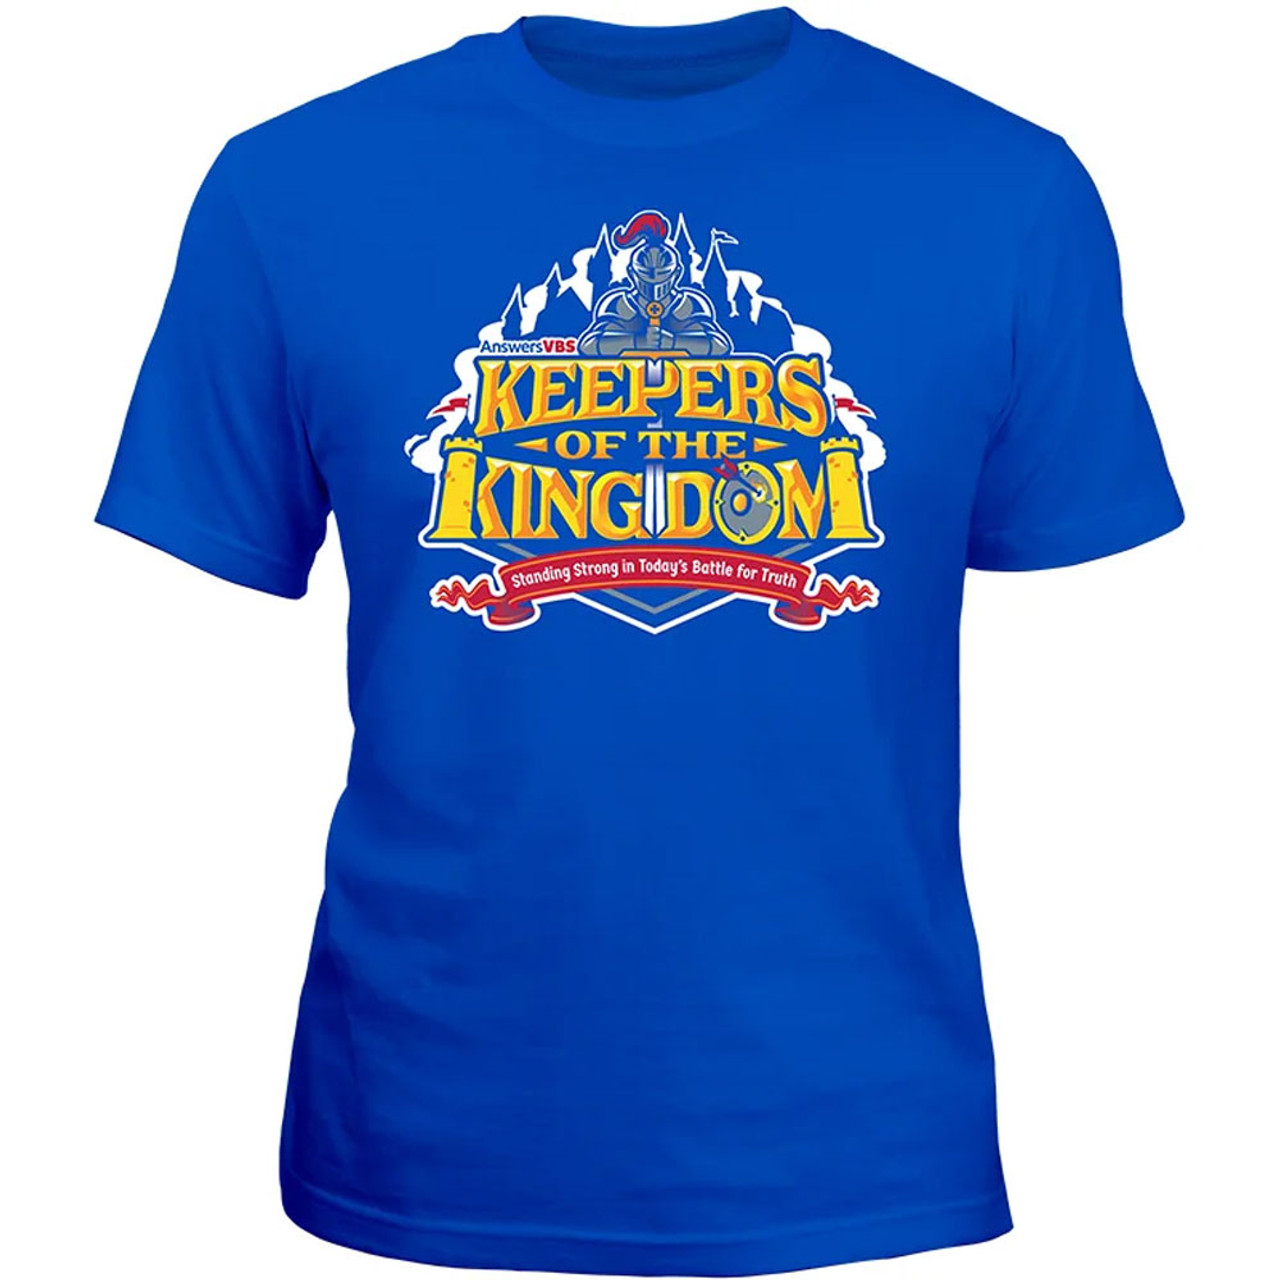 after world domination Kids T-Shirt for Sale by roniy2022